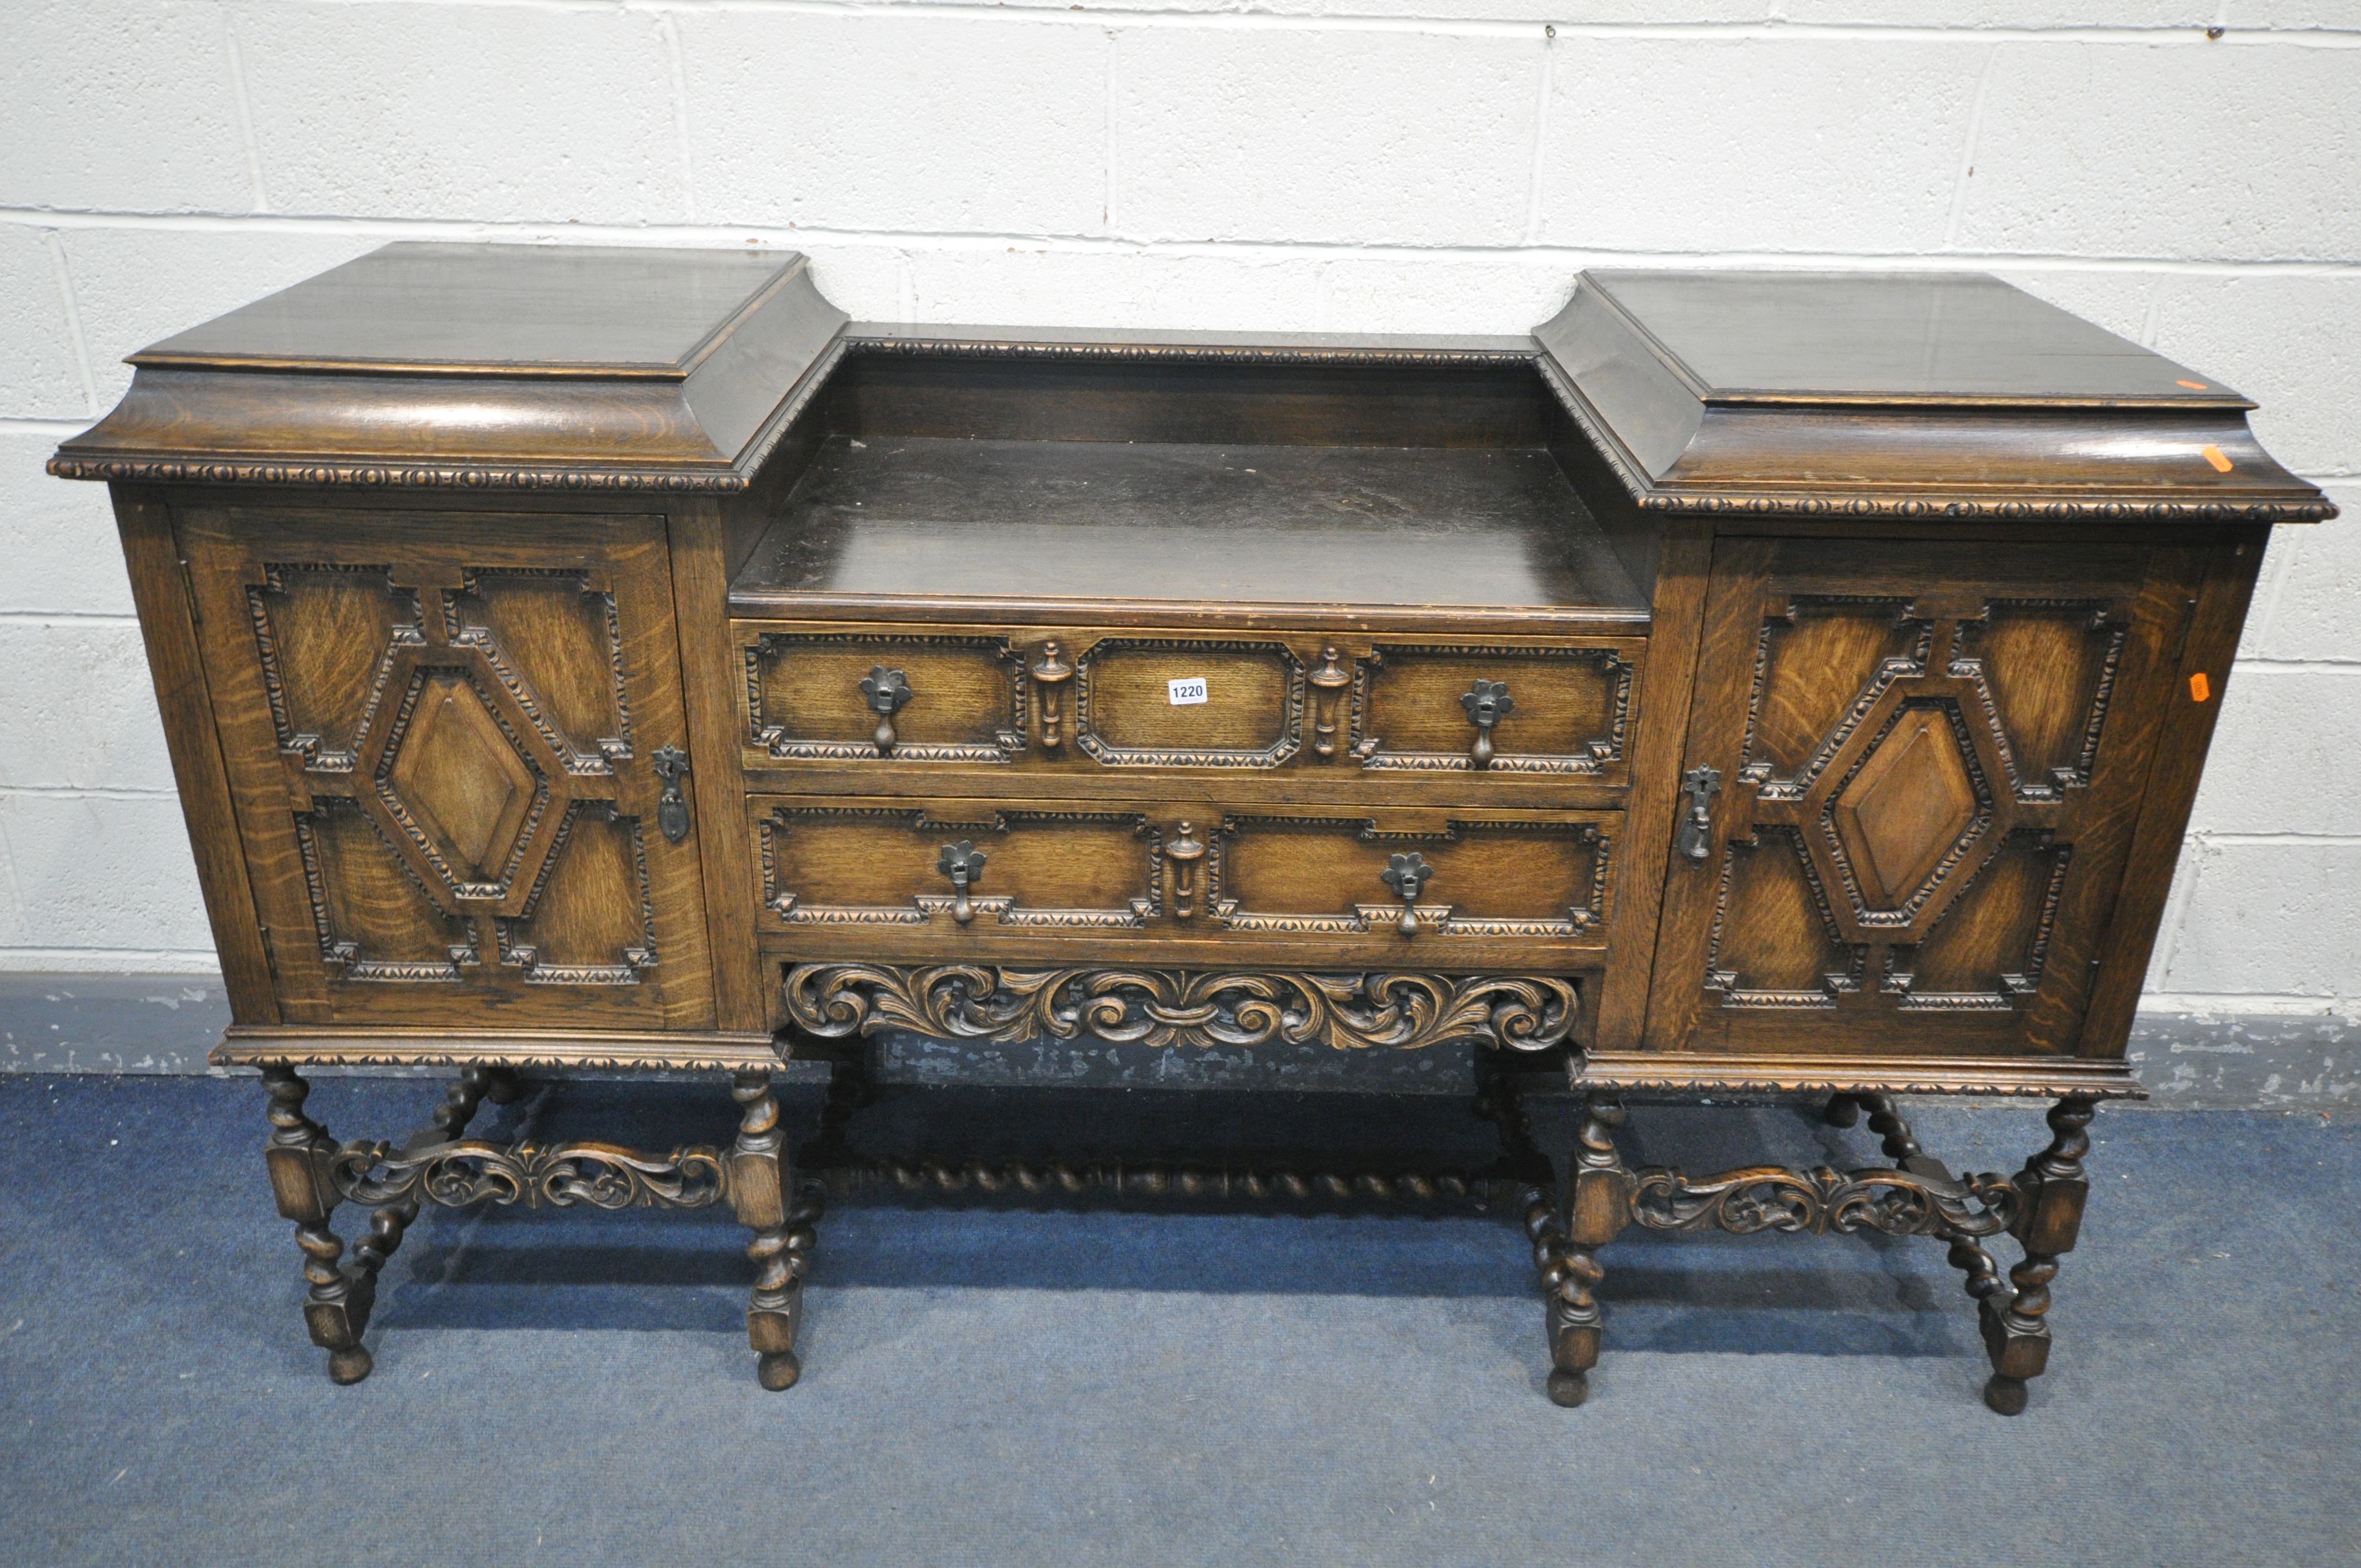 AN EARLY 20TH CENTURY OAK PEDESTAL SIDEBOARD, with geometric doors and drawers, on barley twist legs